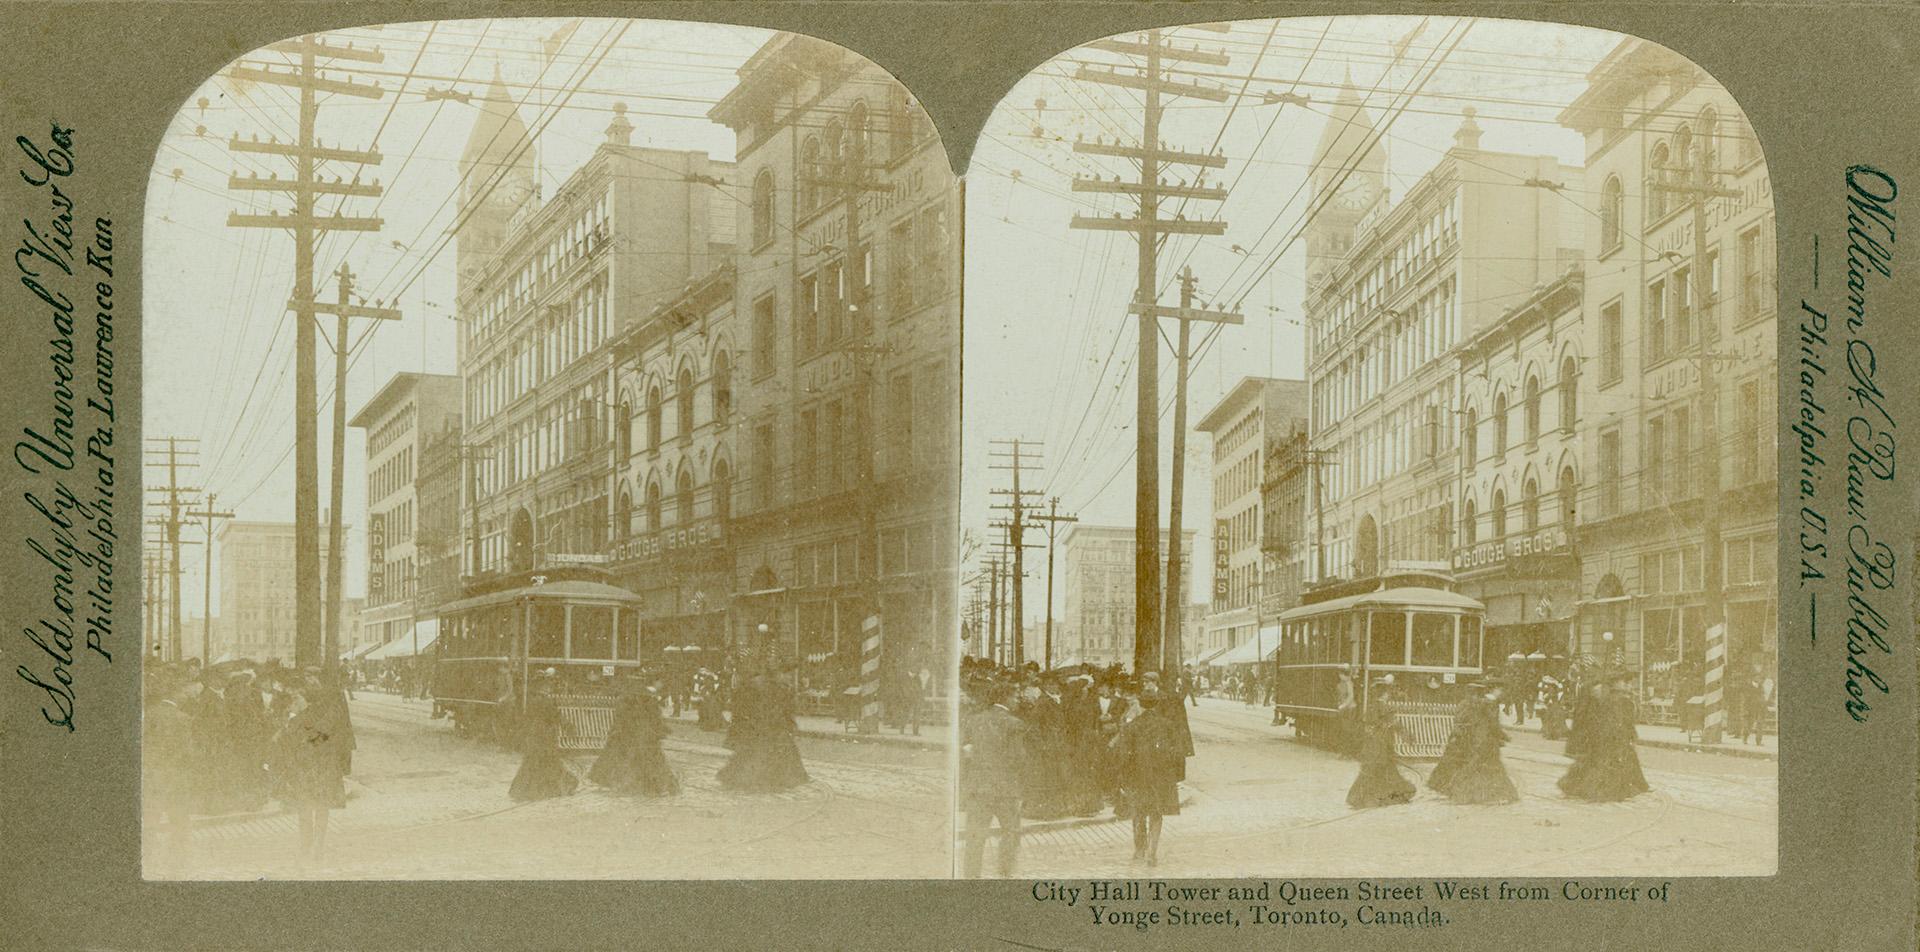 Pictures show a street car at a busy city intersection.